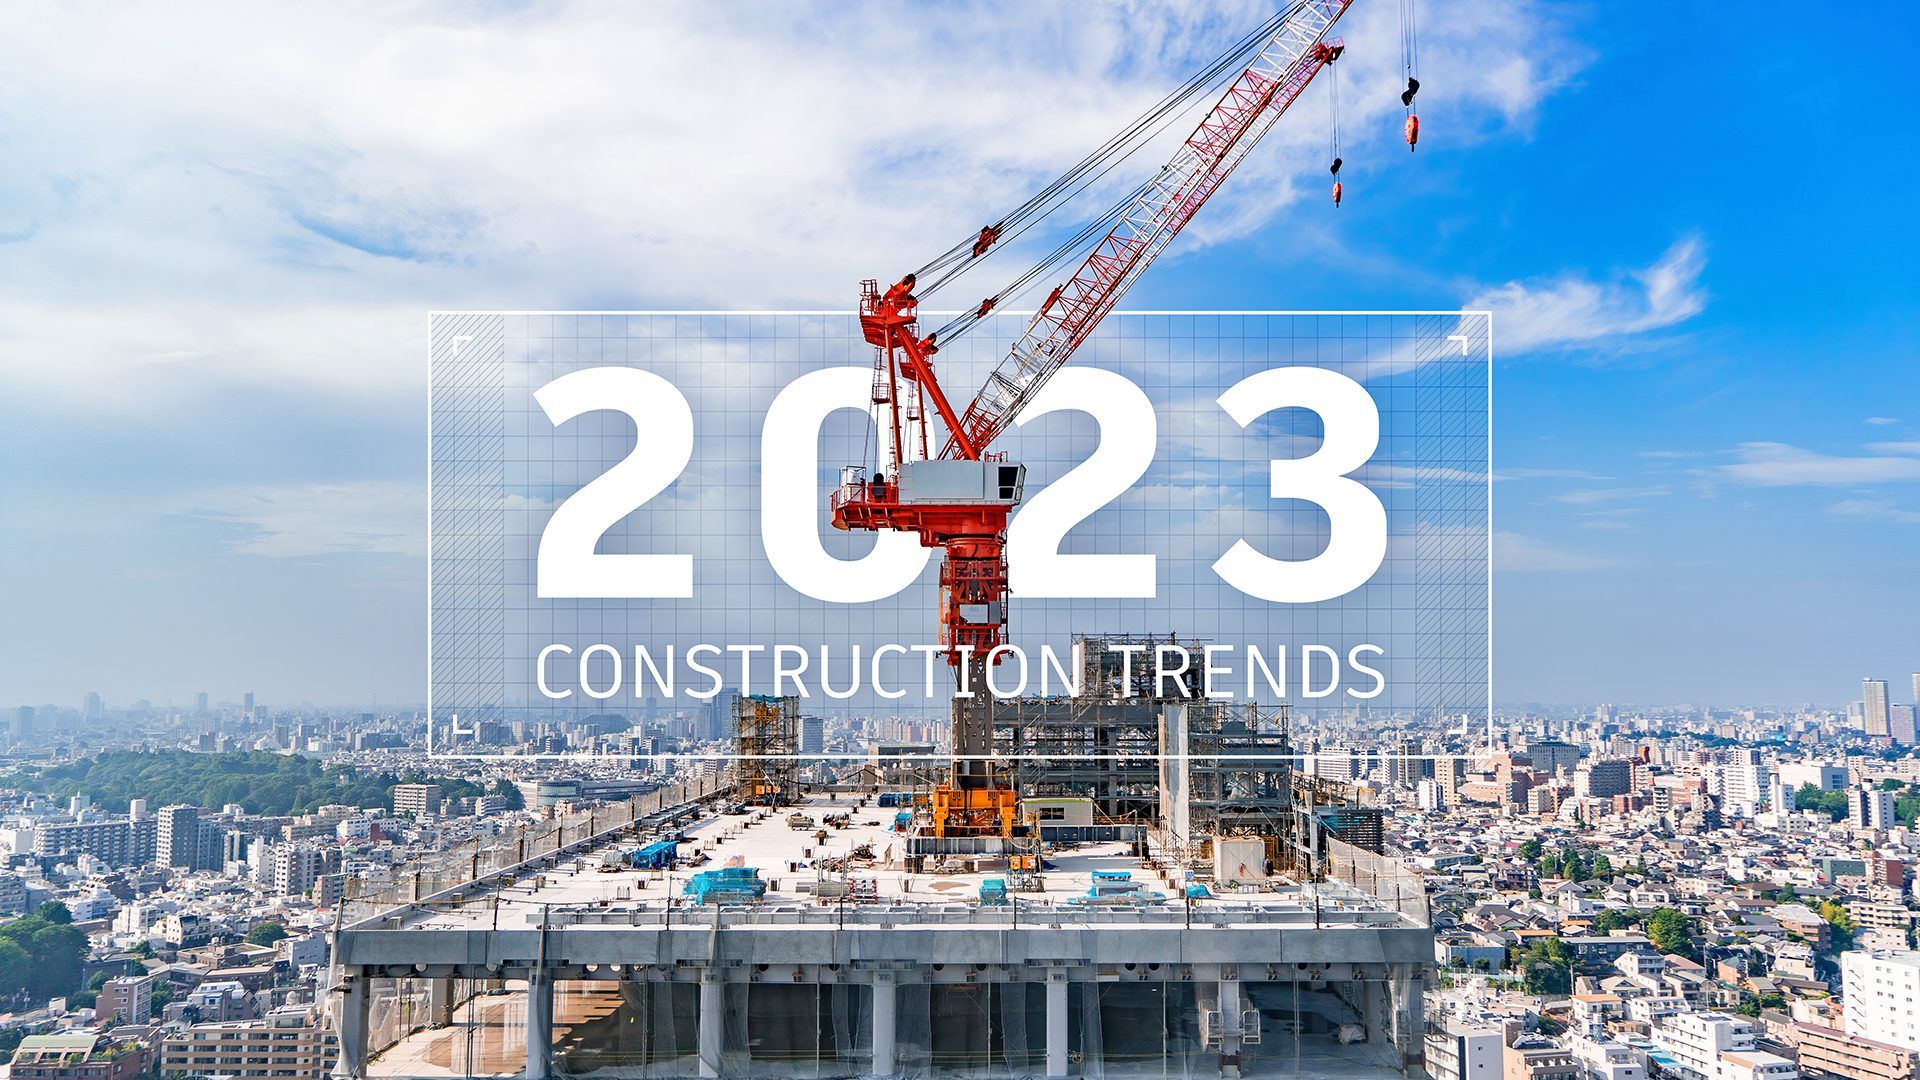 Women in Construction See Digital Transformation as a Top Priority